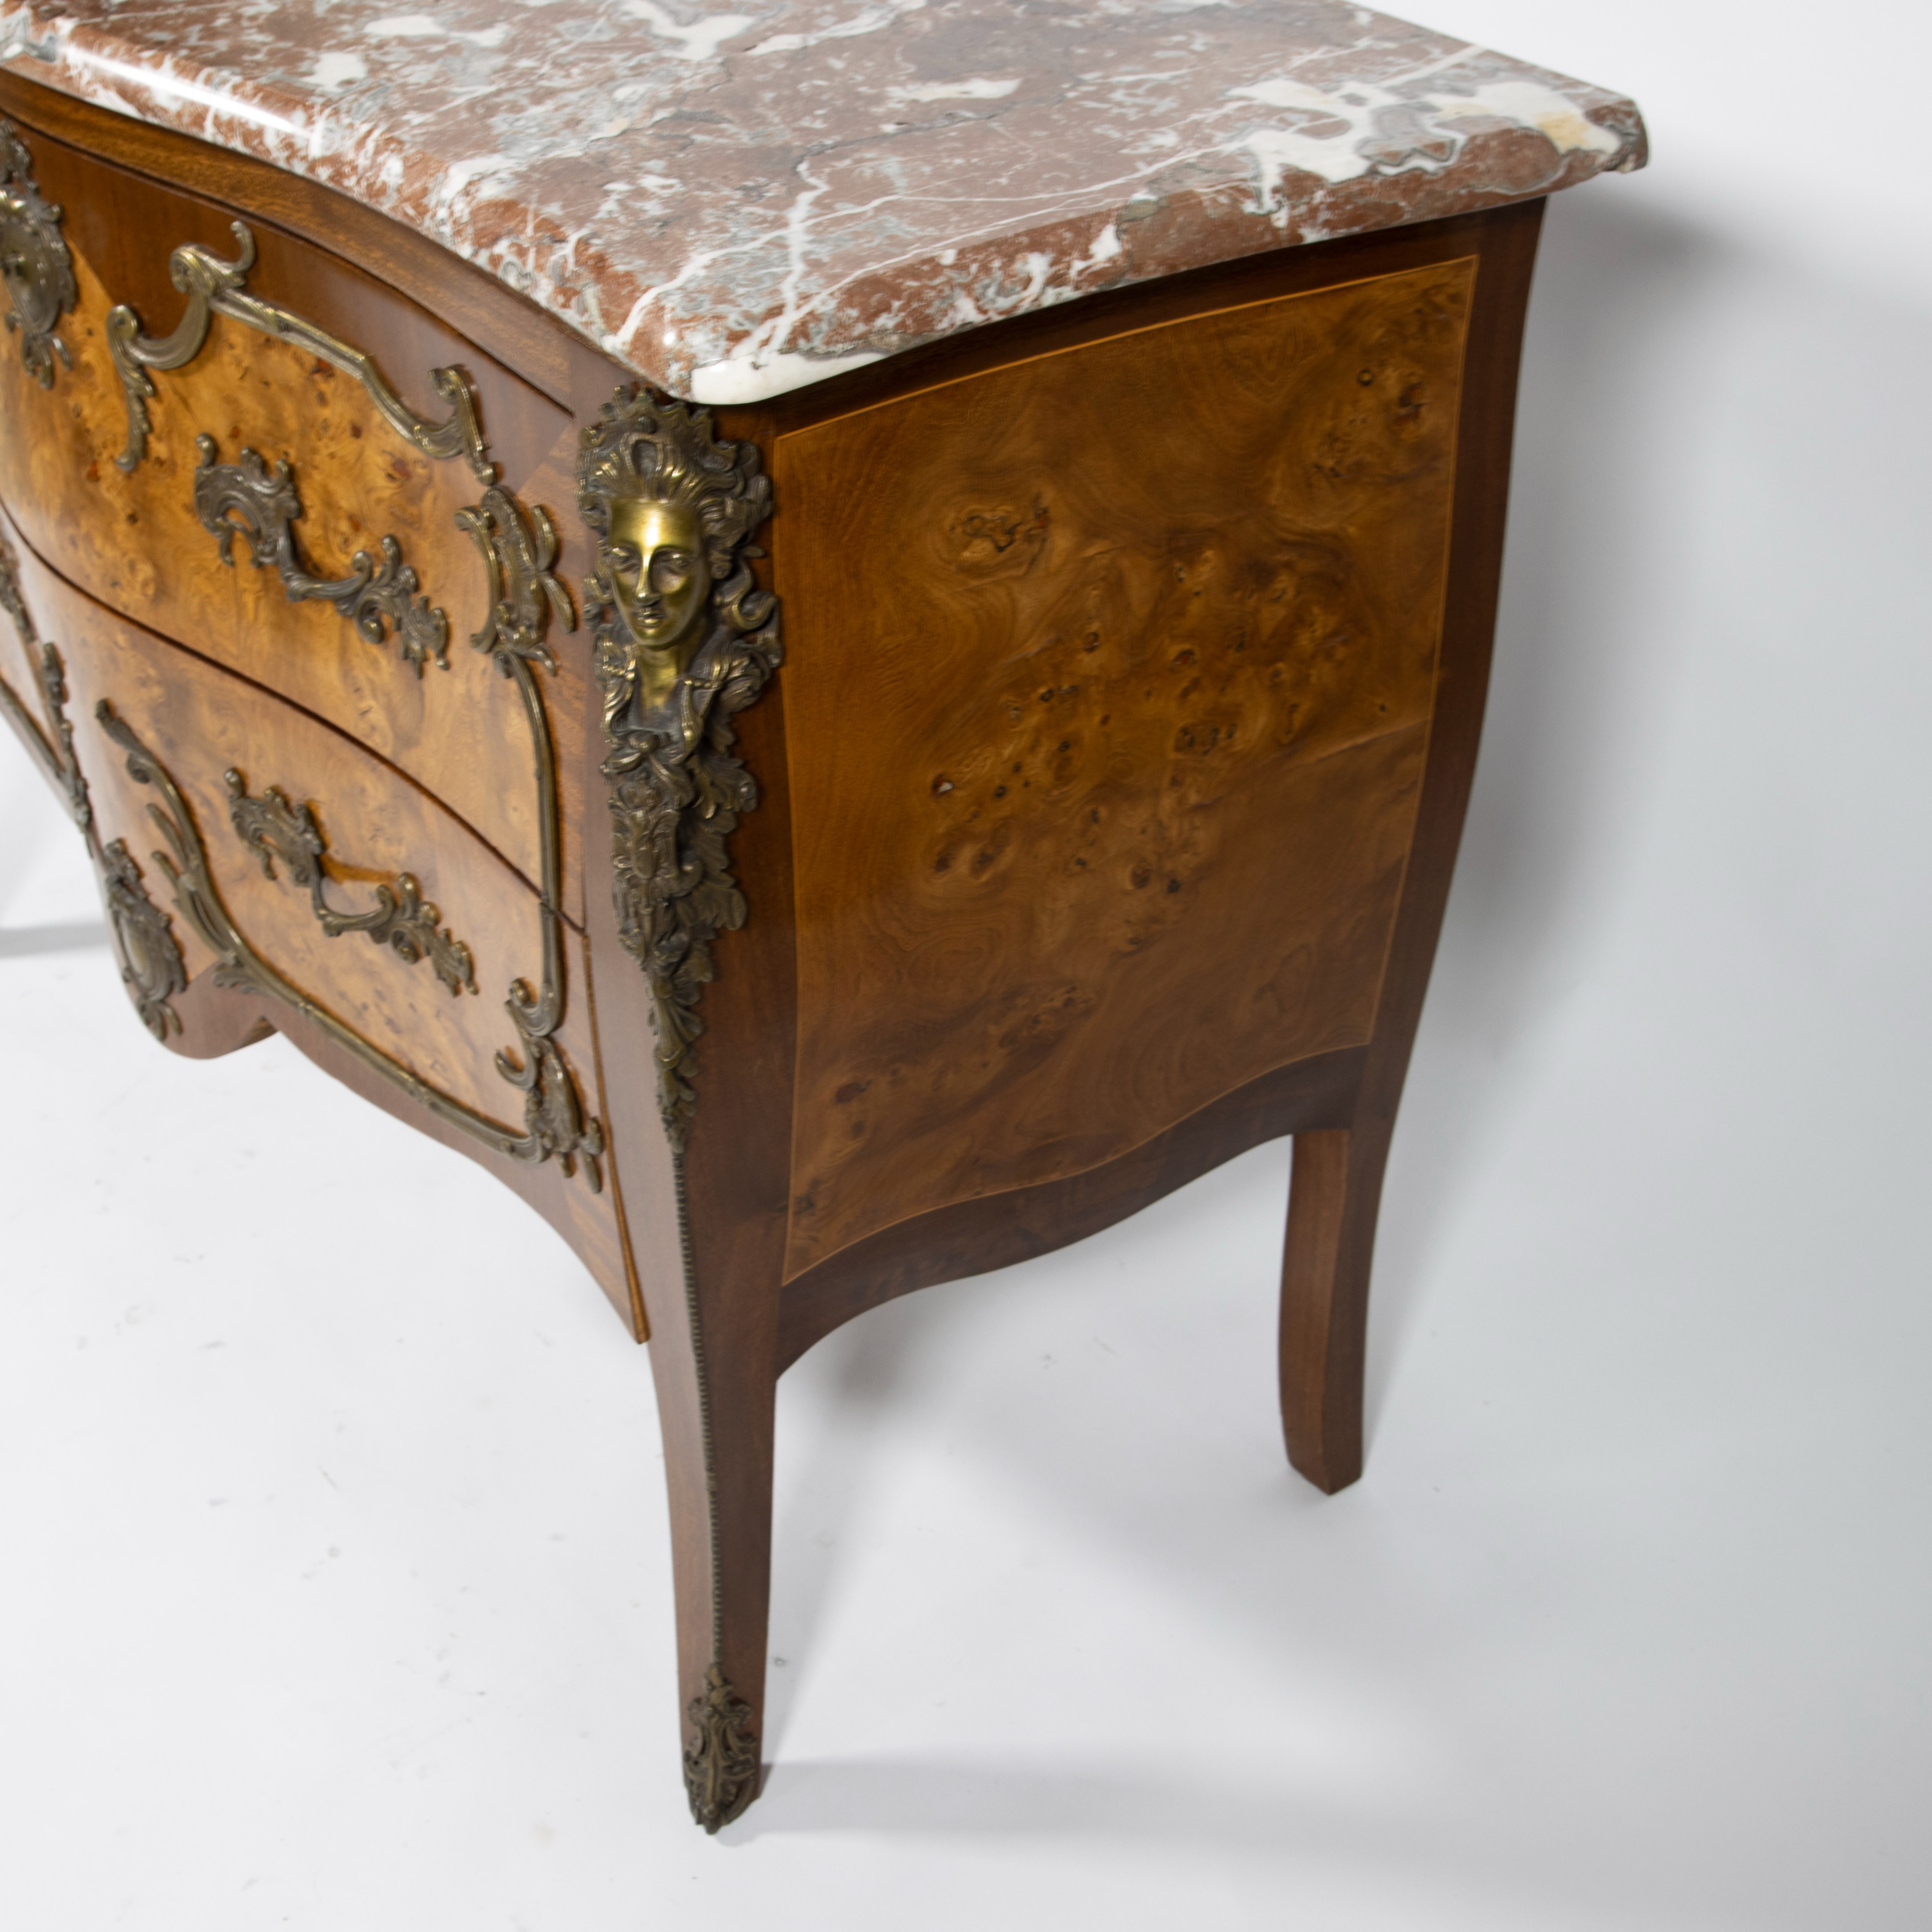 Chest of drawers style Louis XV with bronze ornaments and marble top - Image 3 of 4